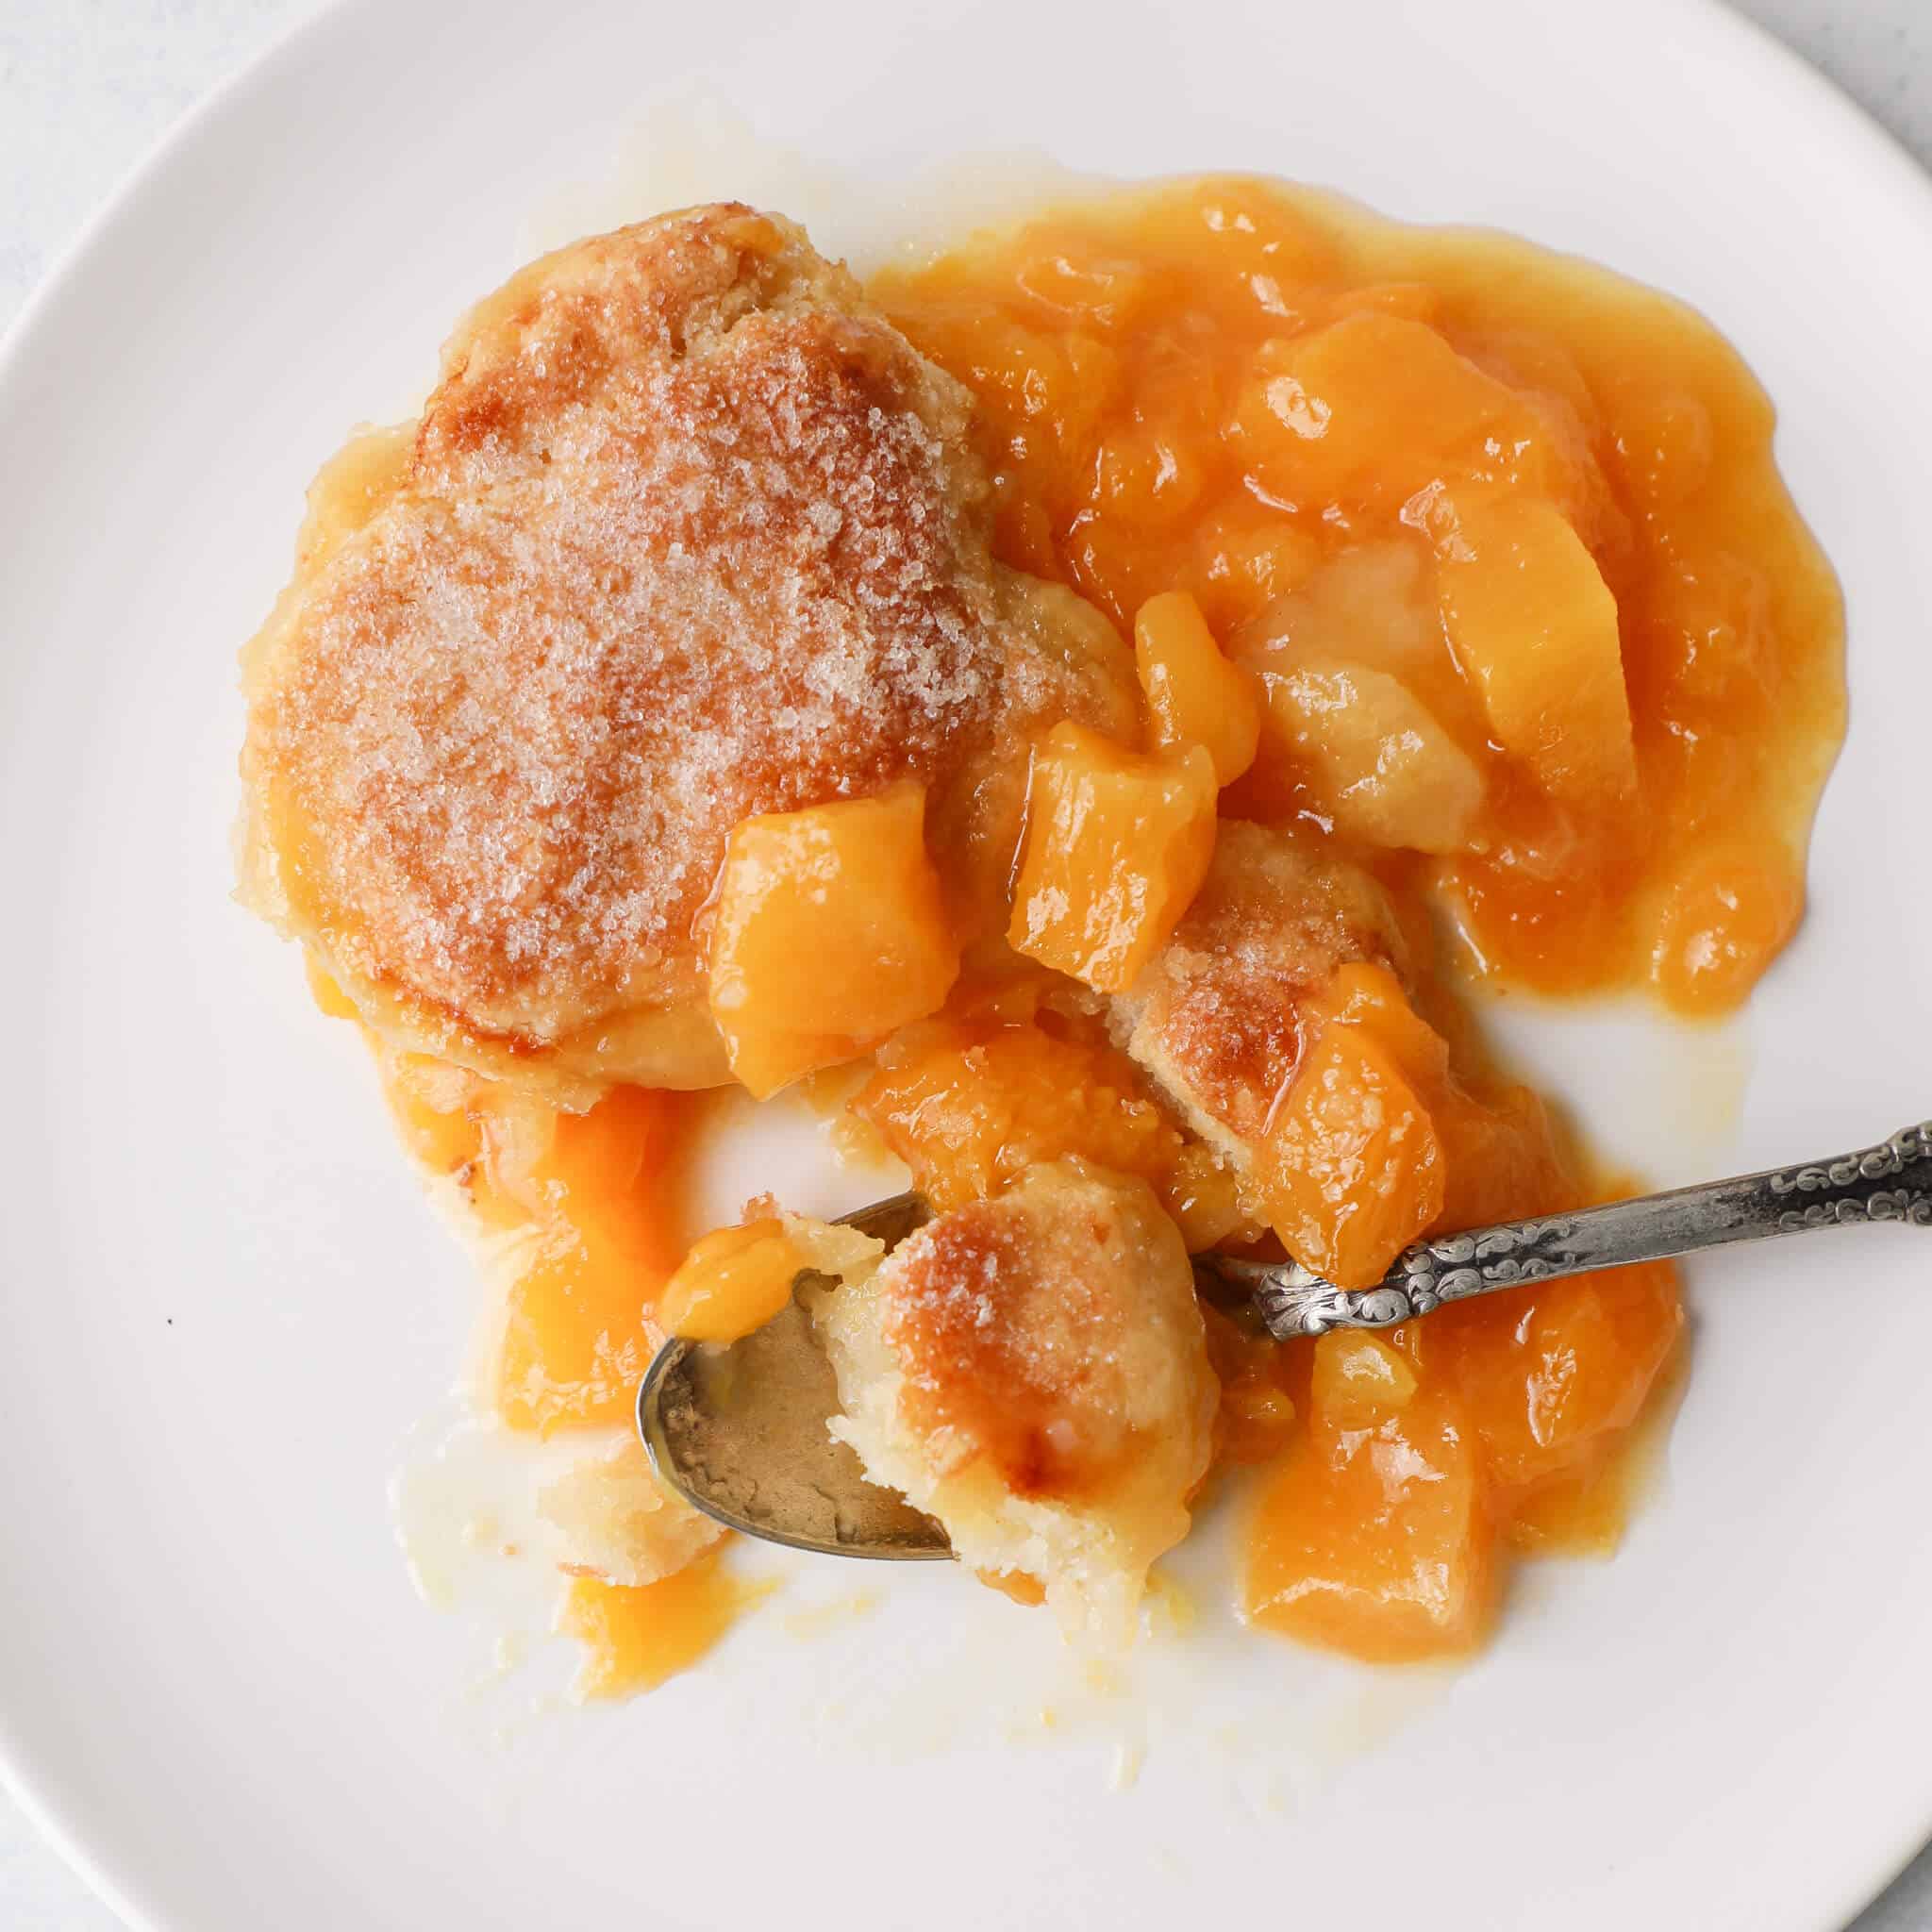 Dessert with peaches served on plate